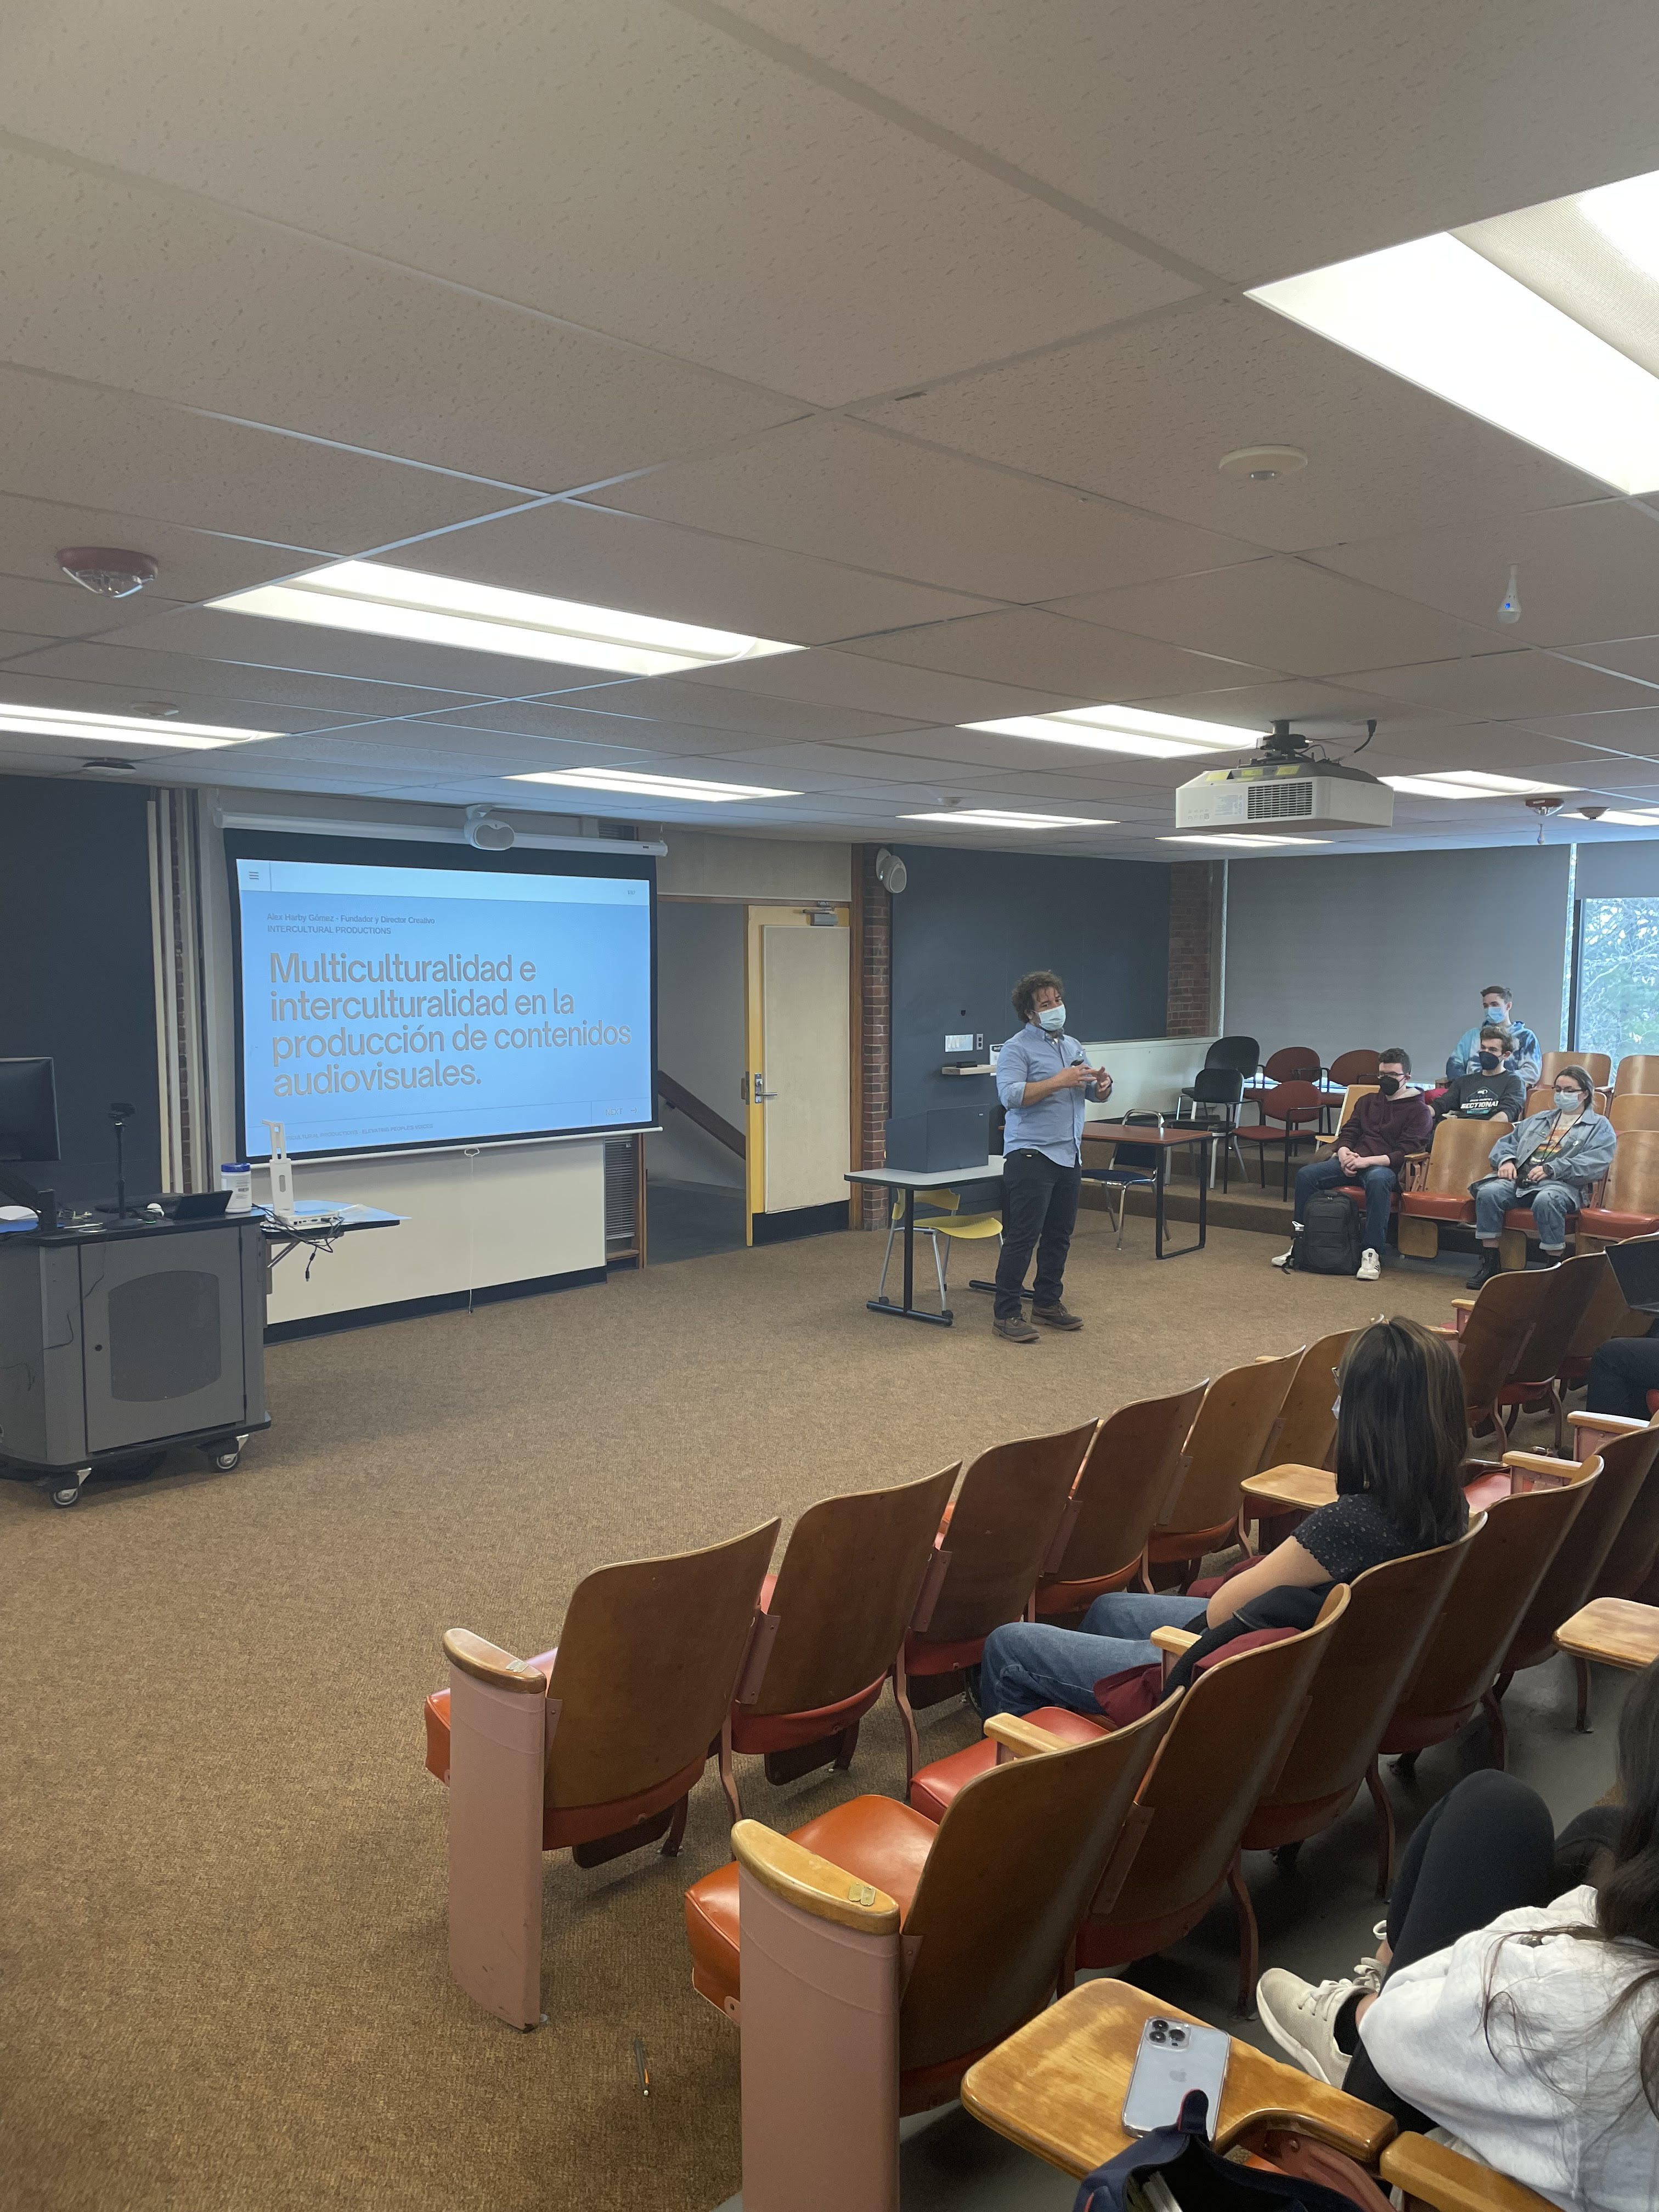 Alex Gomex presenting in large lecture classroom for the recent event